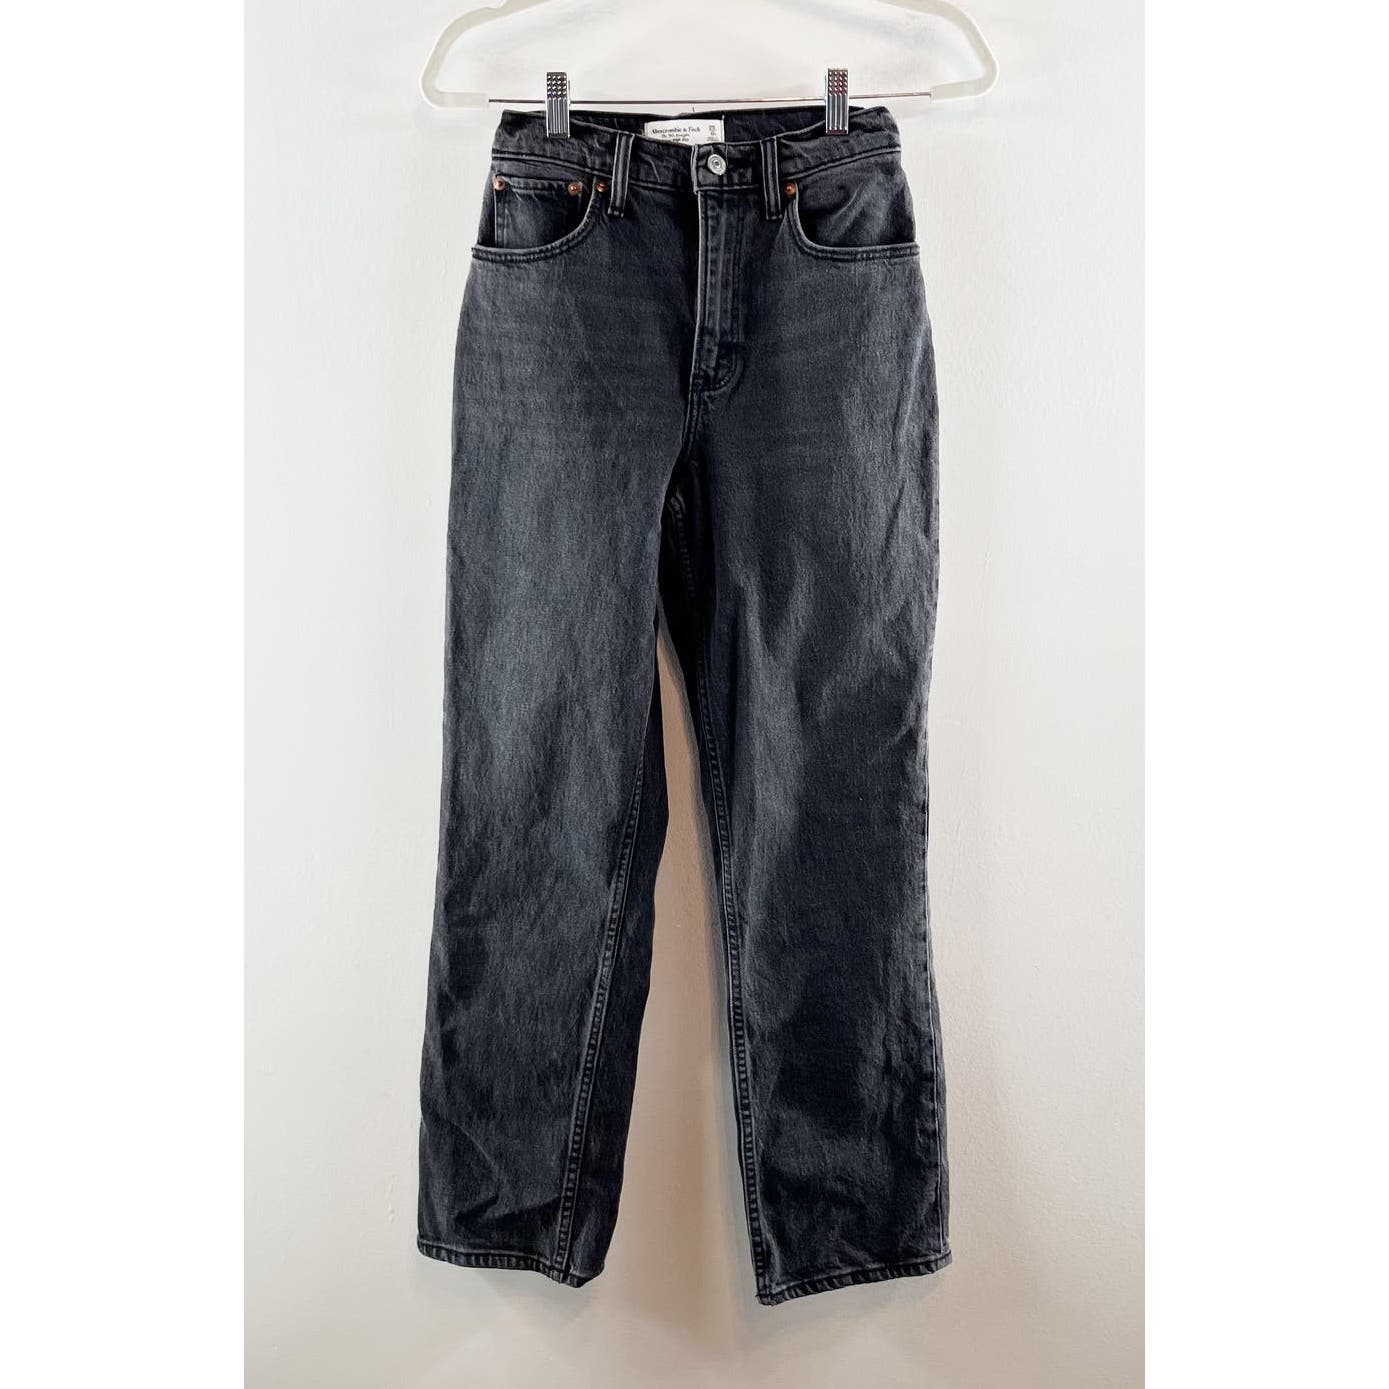 Abercrombie & Fitch Curve Love The 90's Straight Ultra High Rise Jeans Black 0